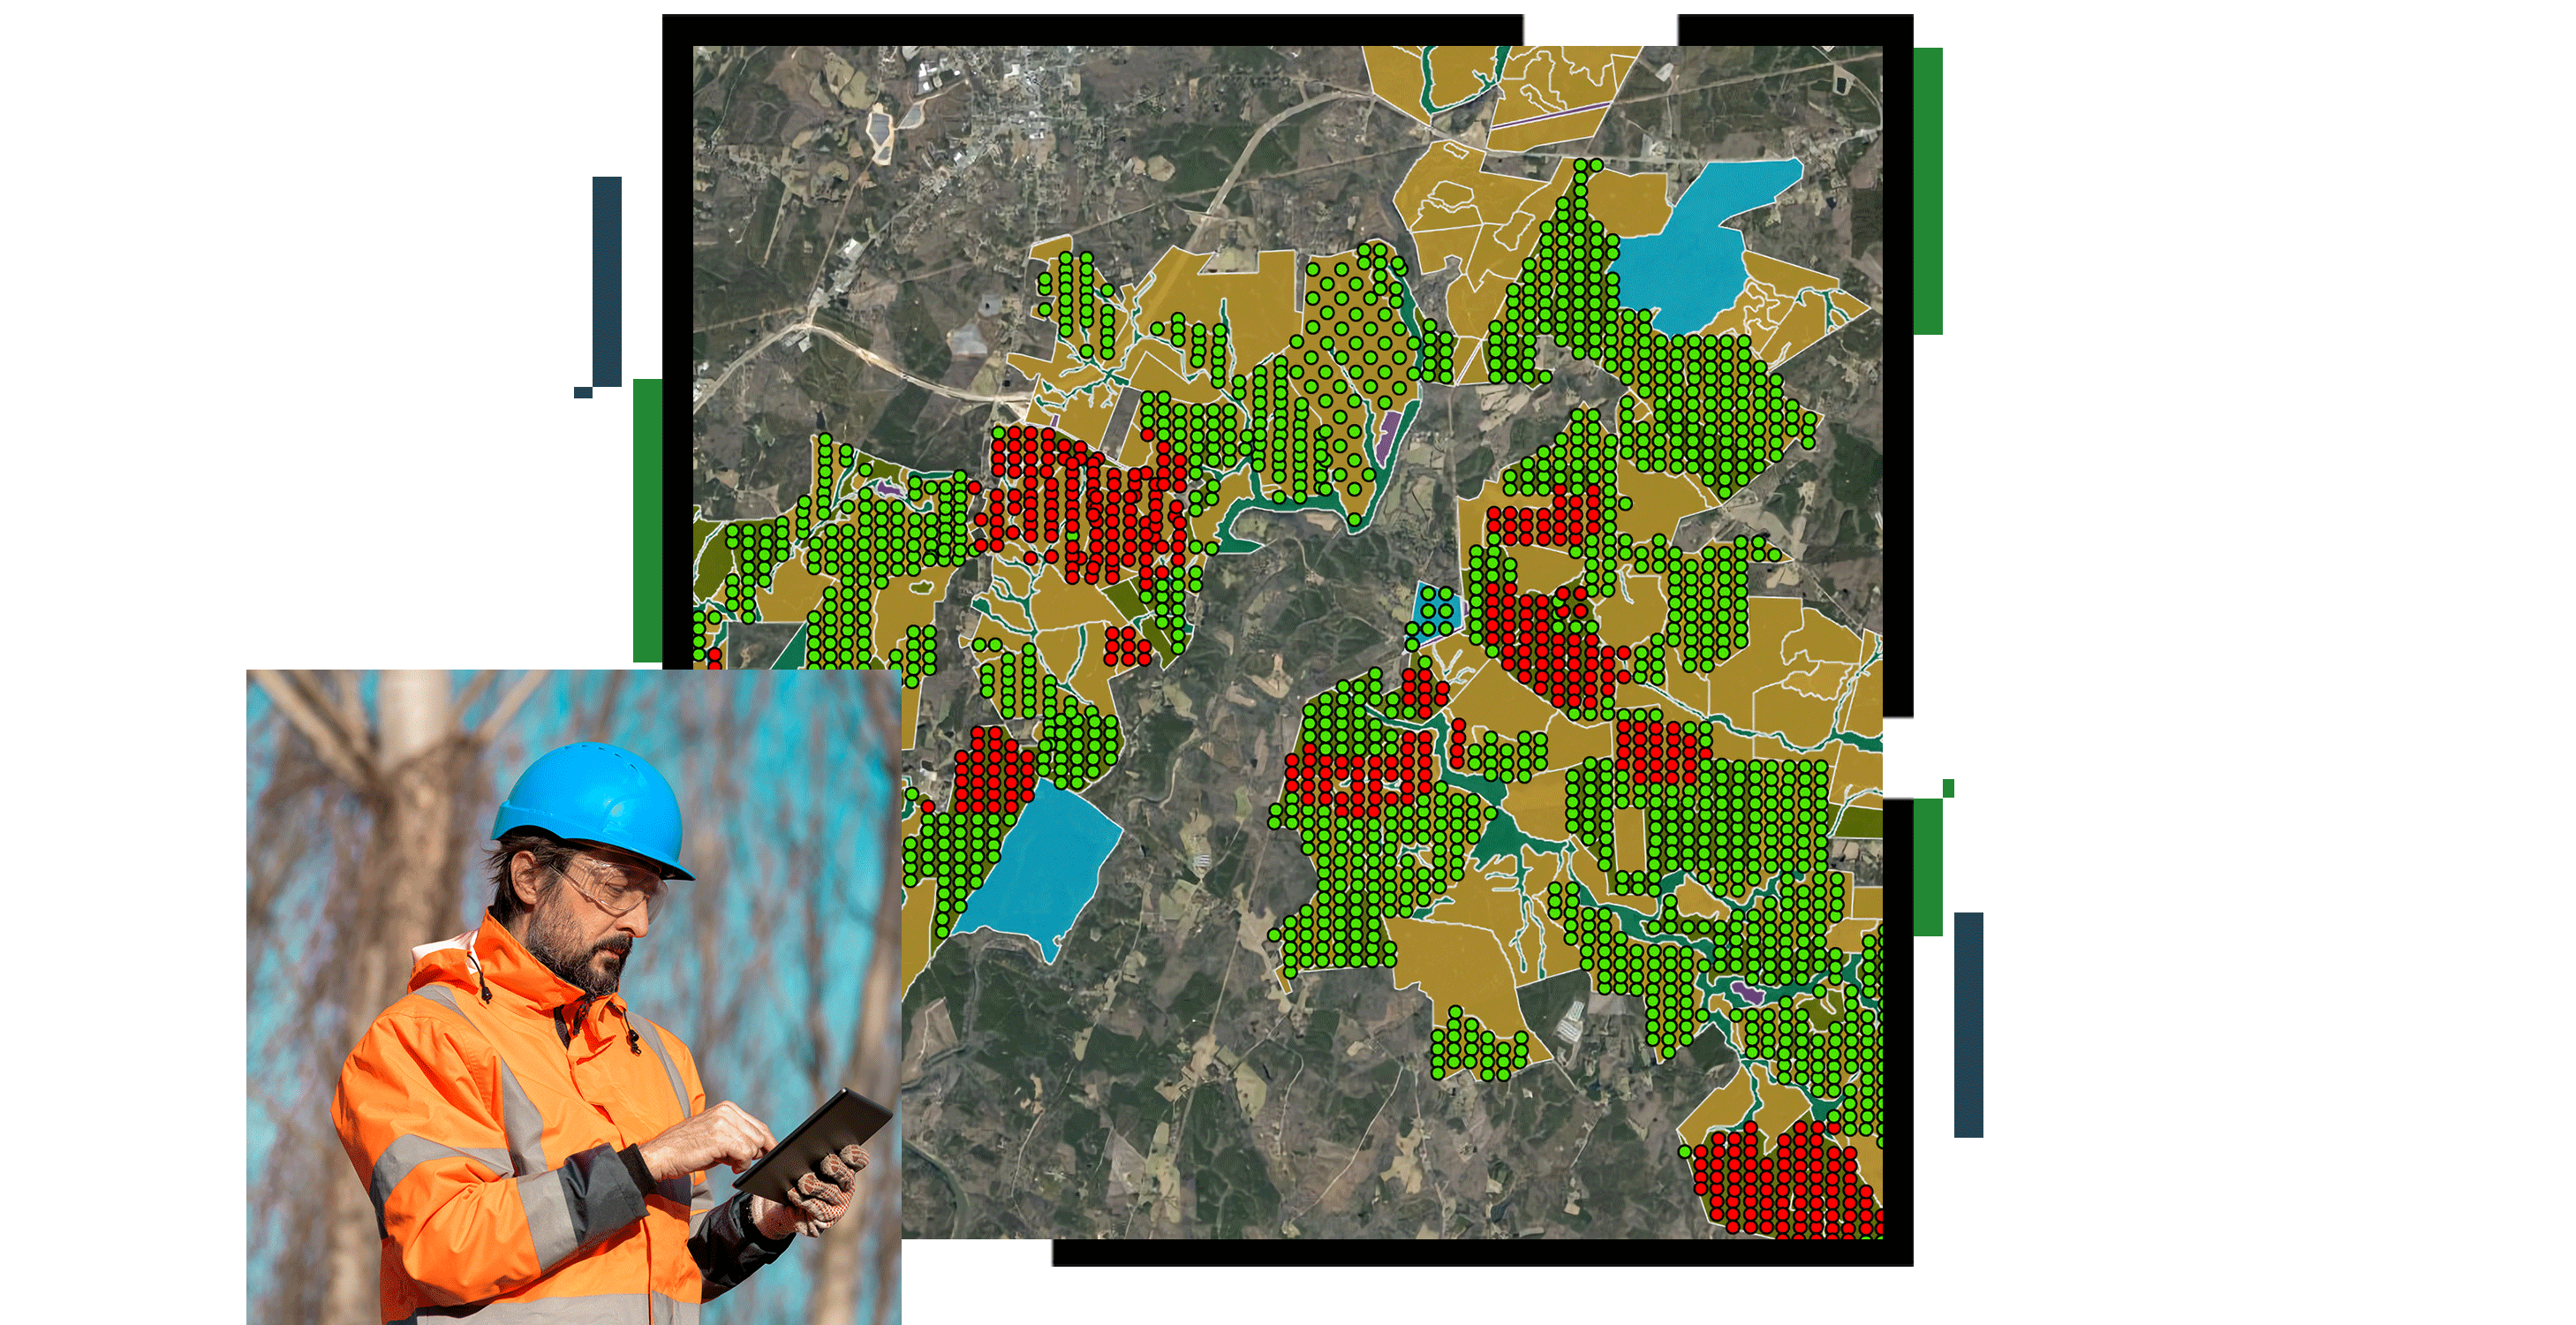 A concentration map in red and green points on a gray background, overlaid with a photo of a person in an orange utility vest and hardhat using a tablet in a forest